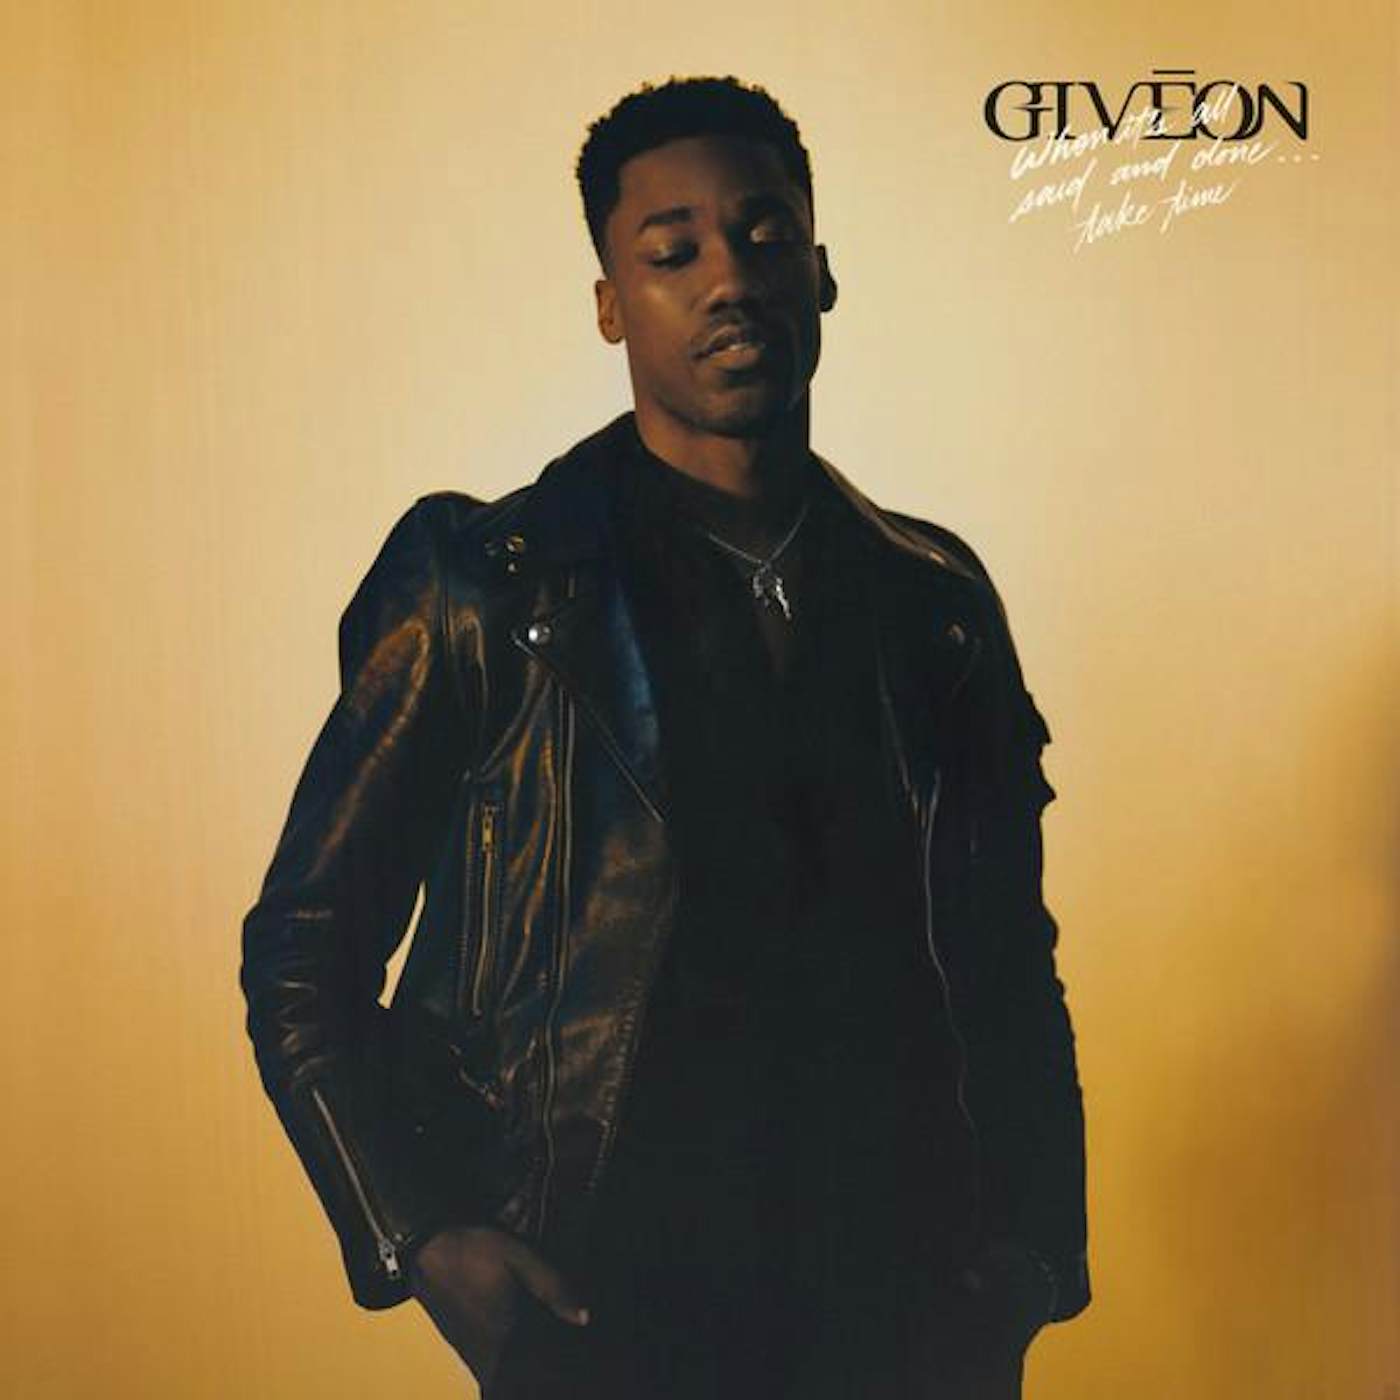 Giveon WHEN IT'S ALL SAID & DONE…TAKE TIME (150G) Vinyl Record